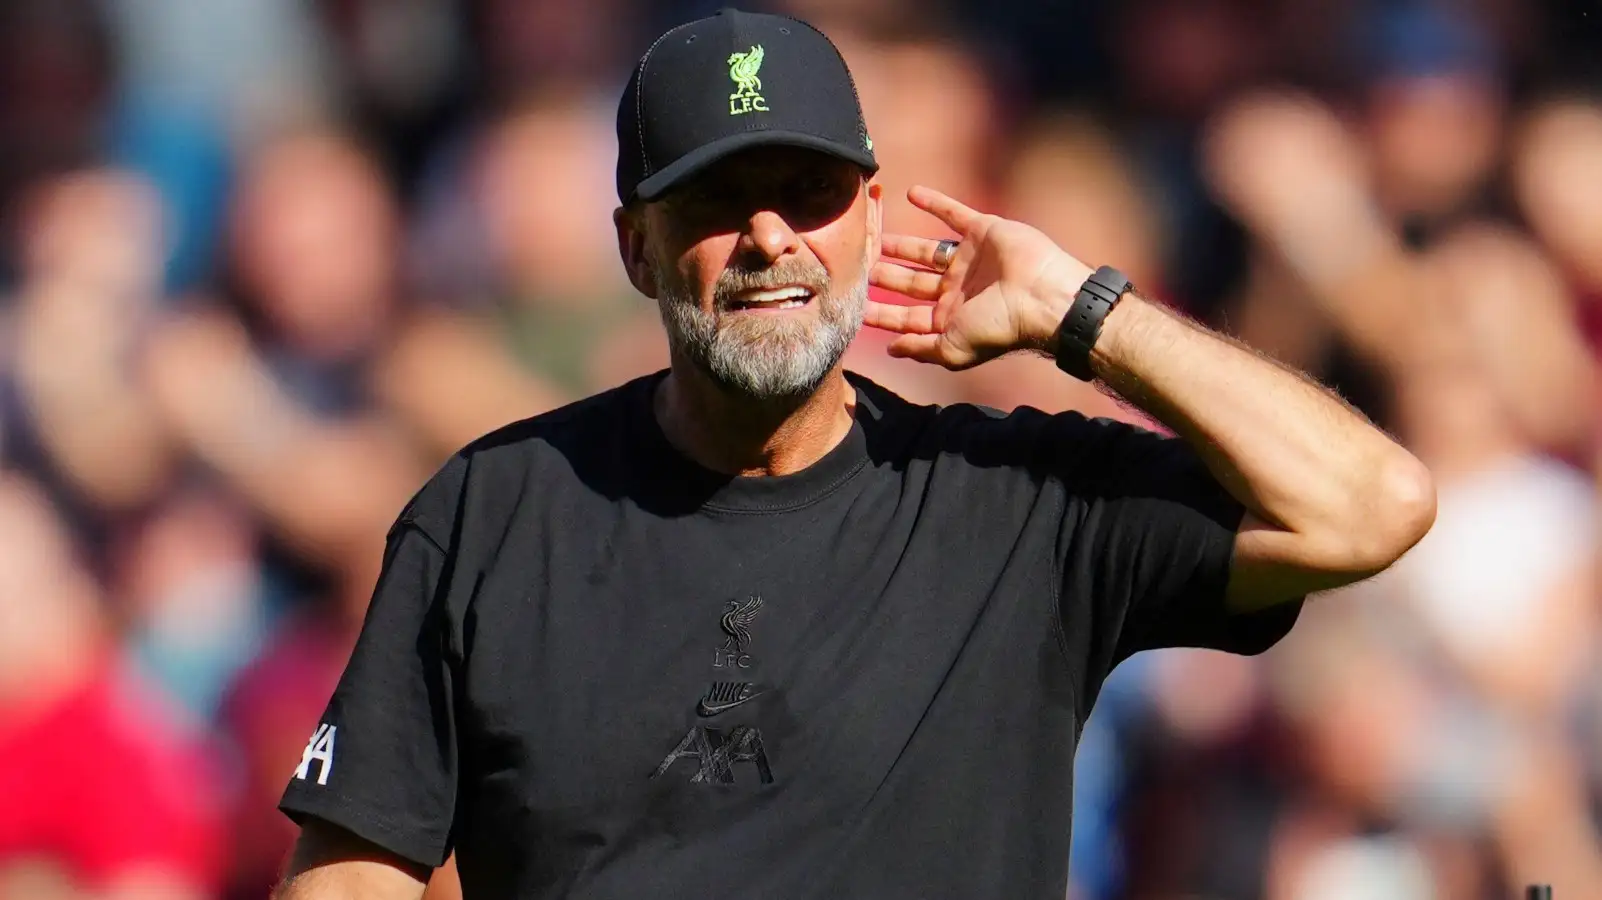 Jurgen Klopp mugs his ear to Liverpool supporters after a win.